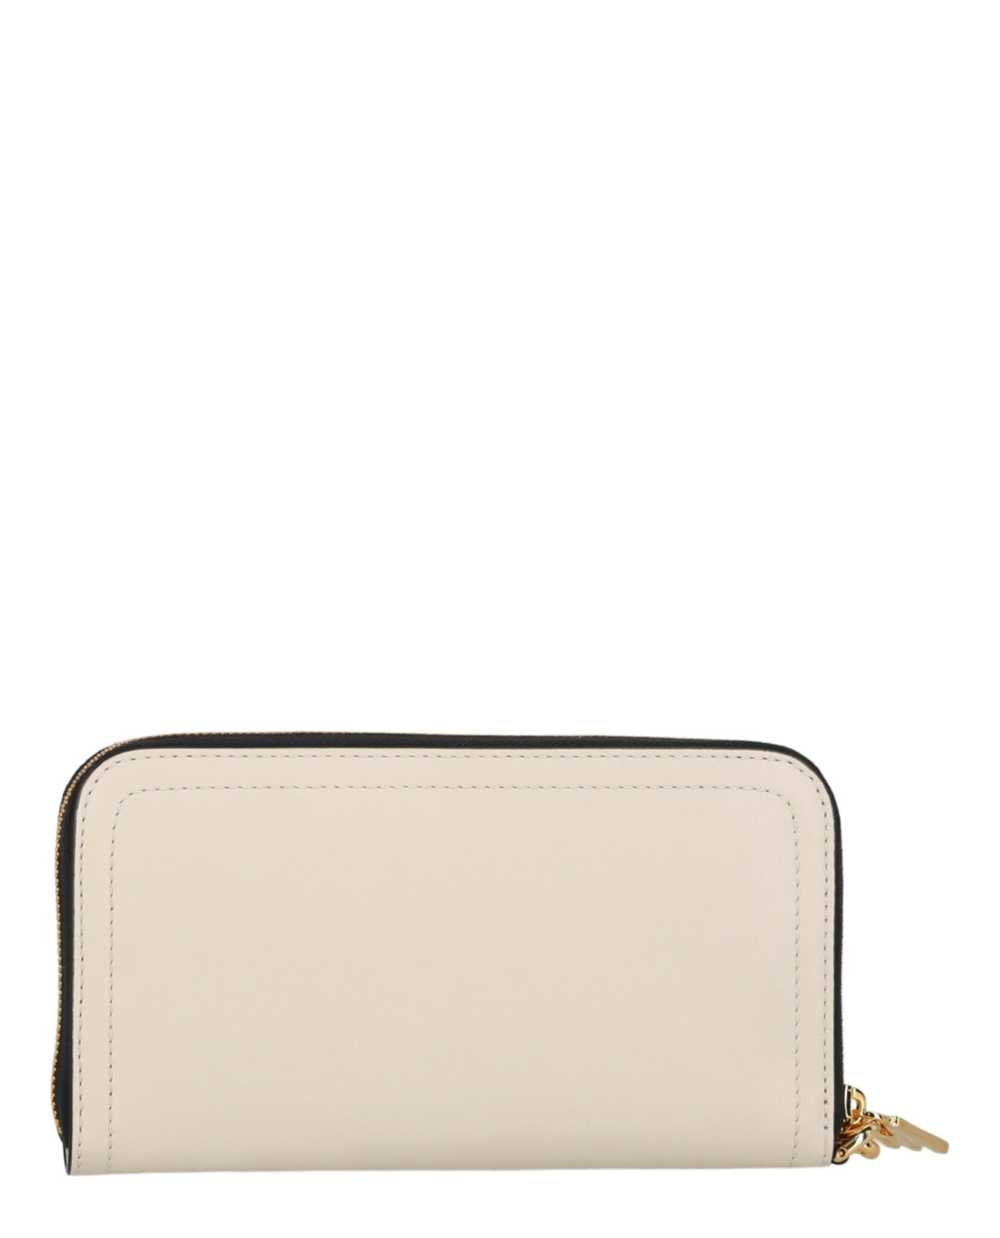 Moschino Womens M Logo Leather Wallet - image 3